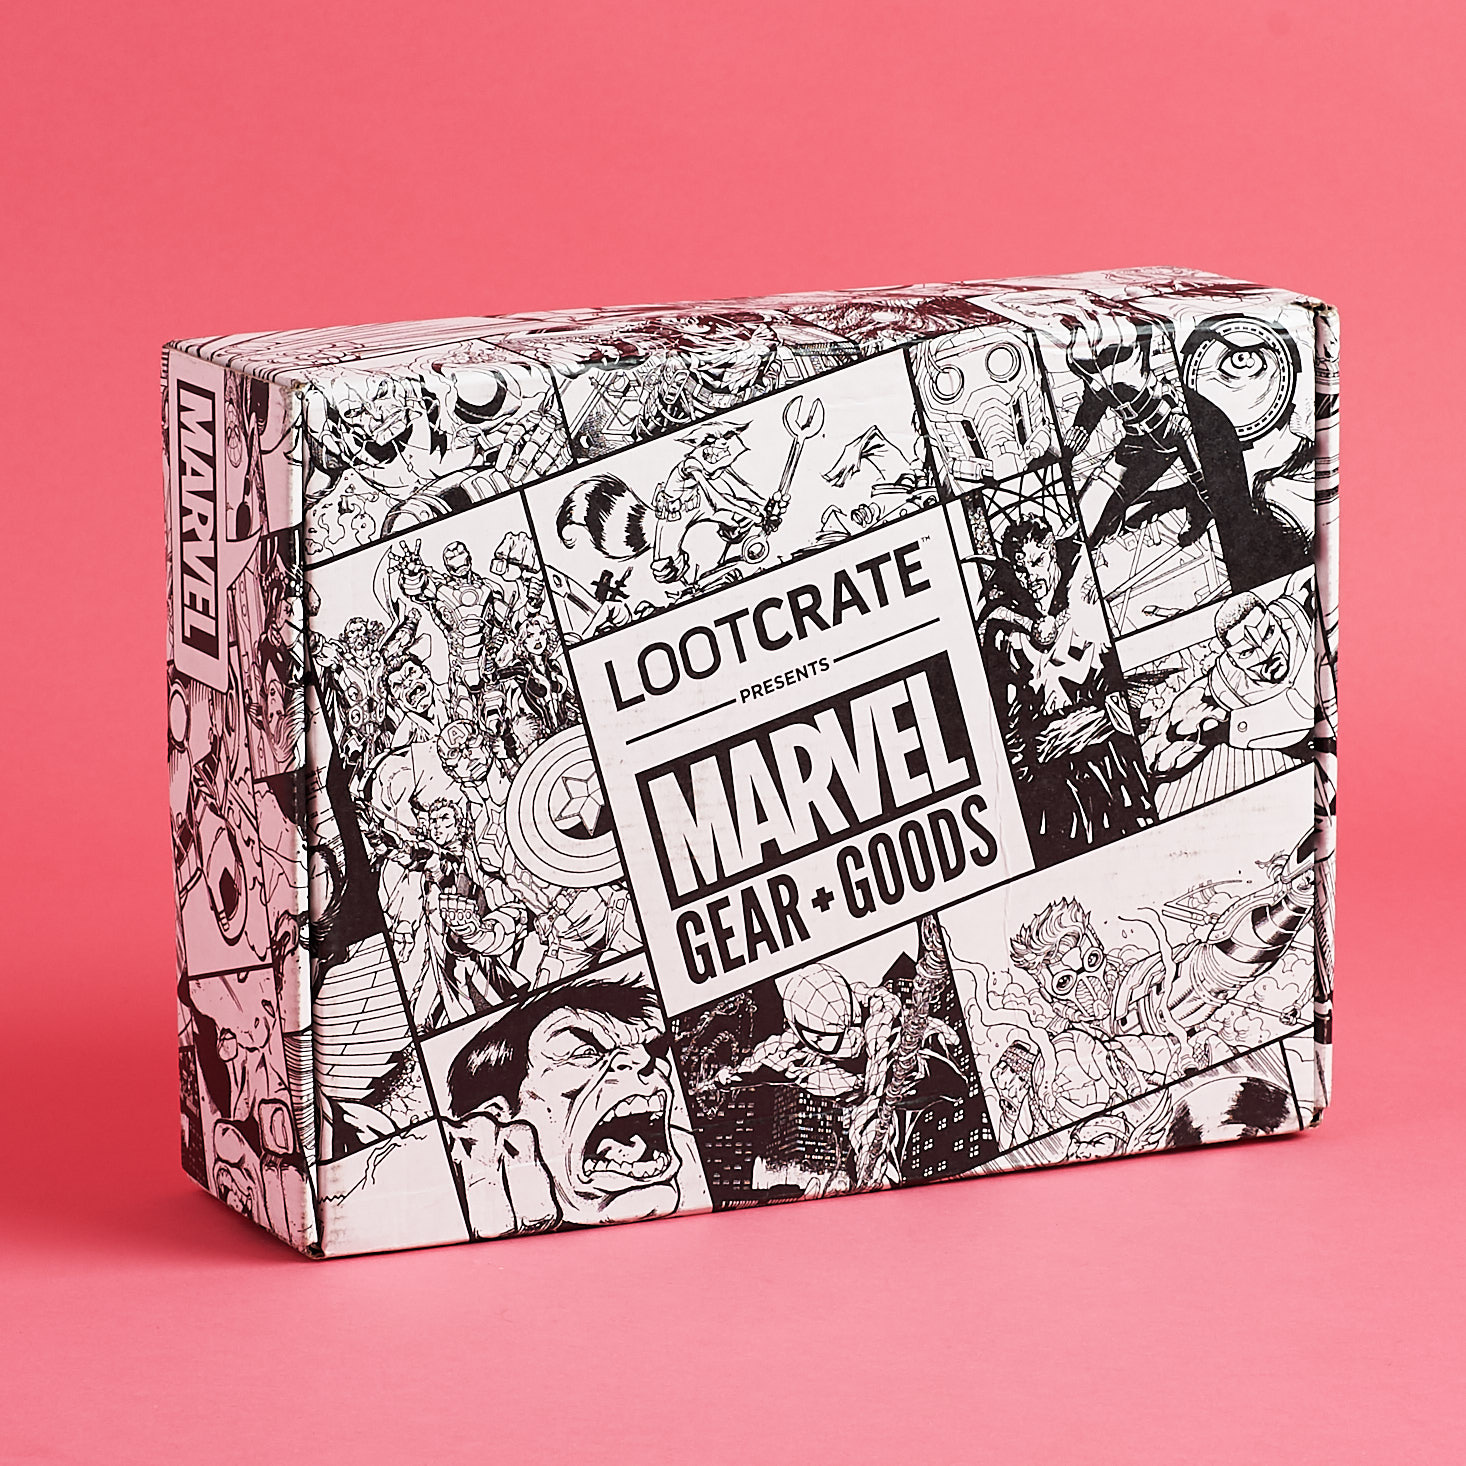 Marvel Gear + Goods by Loot Crate Review + Coupon – September 2018